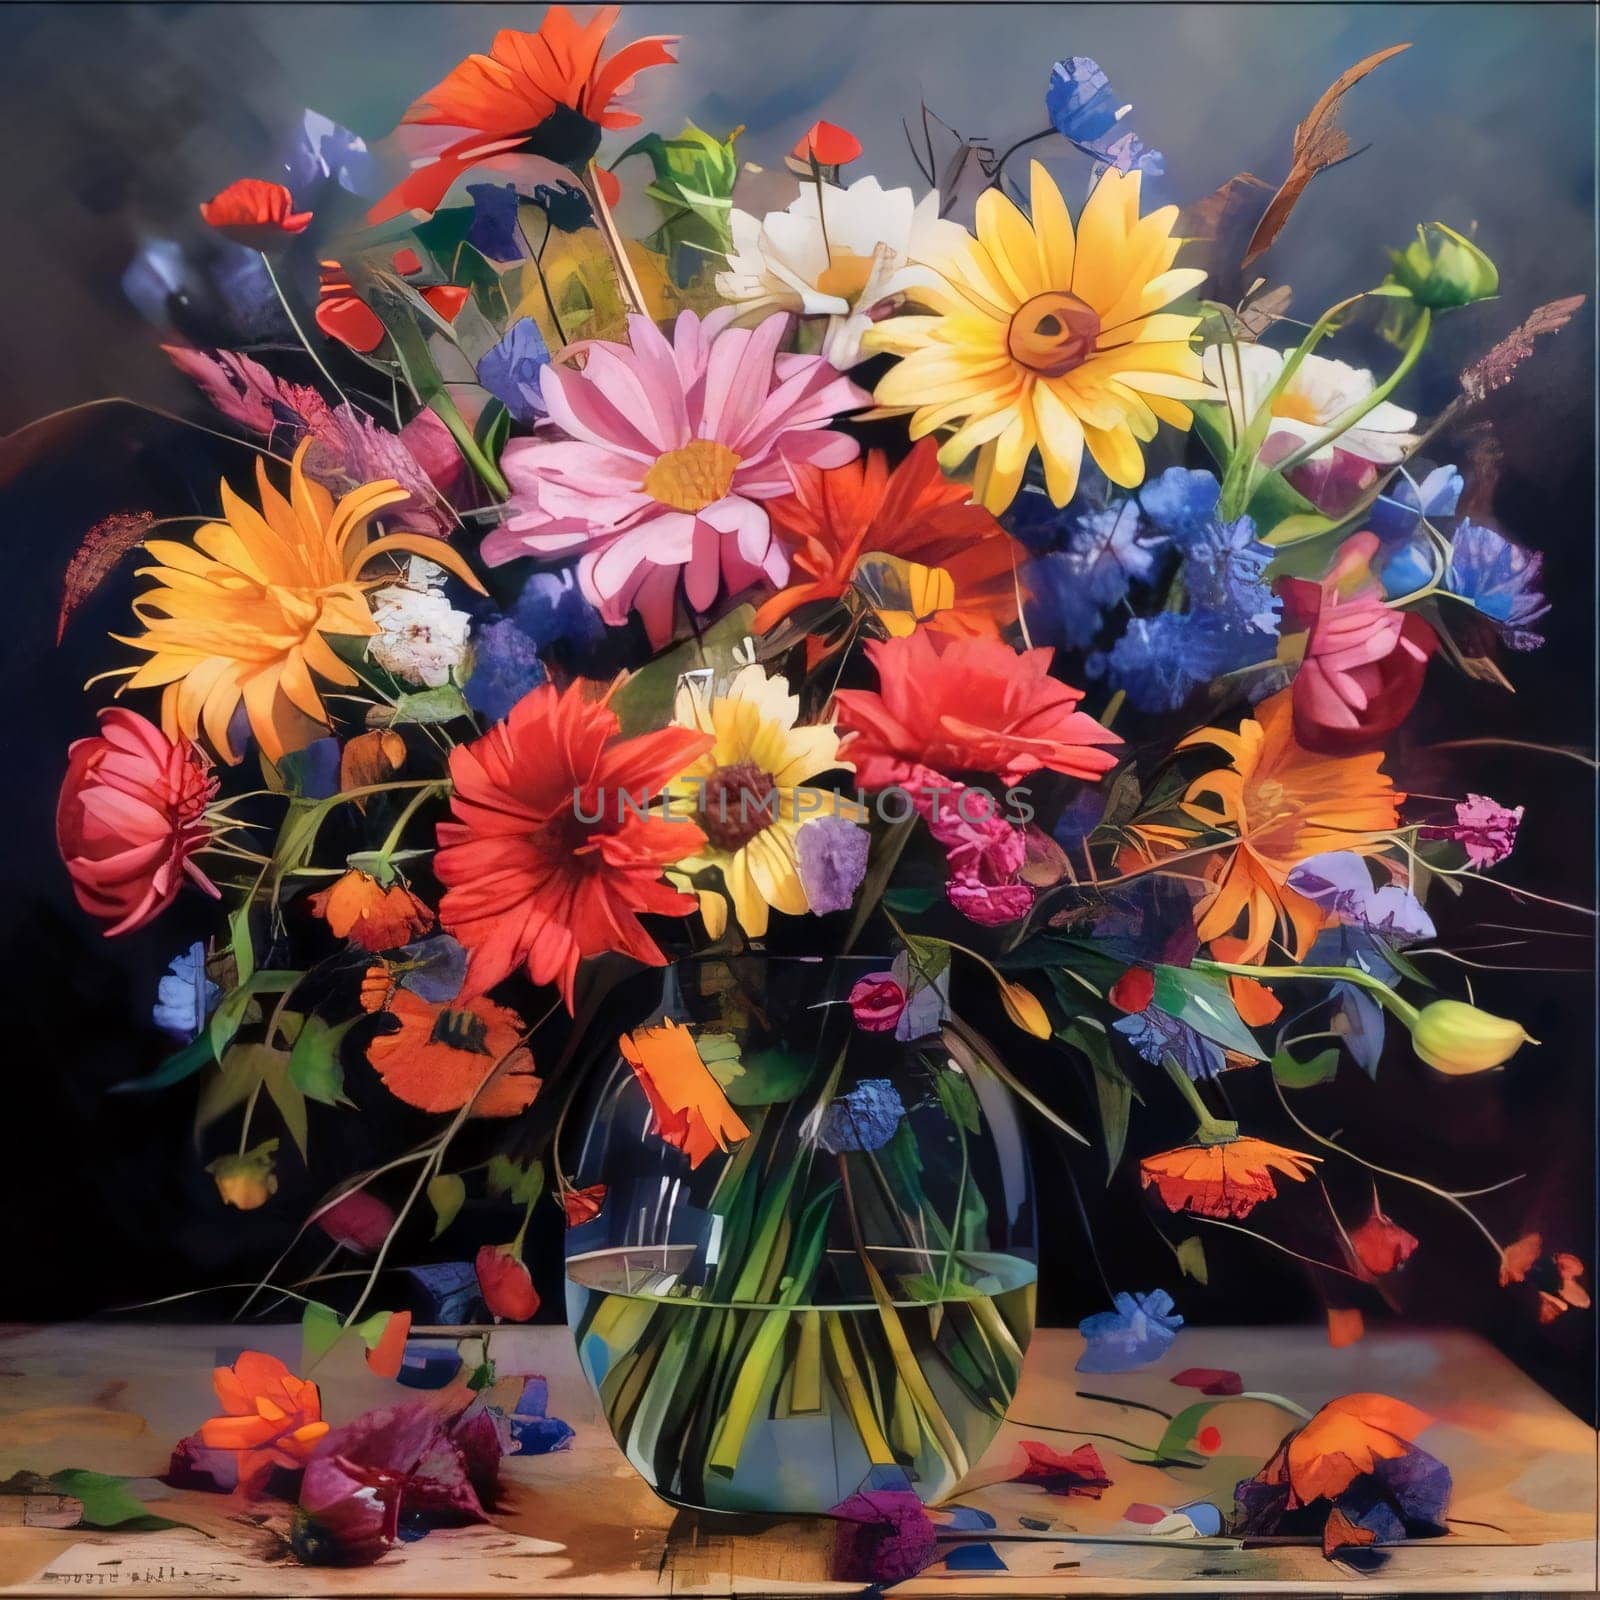 Colorful flowers of different kinds of species in a glass vase, on a dark background. Flowering flowers, a symbol of spring, new life. A joyful time of nature waking up to life.